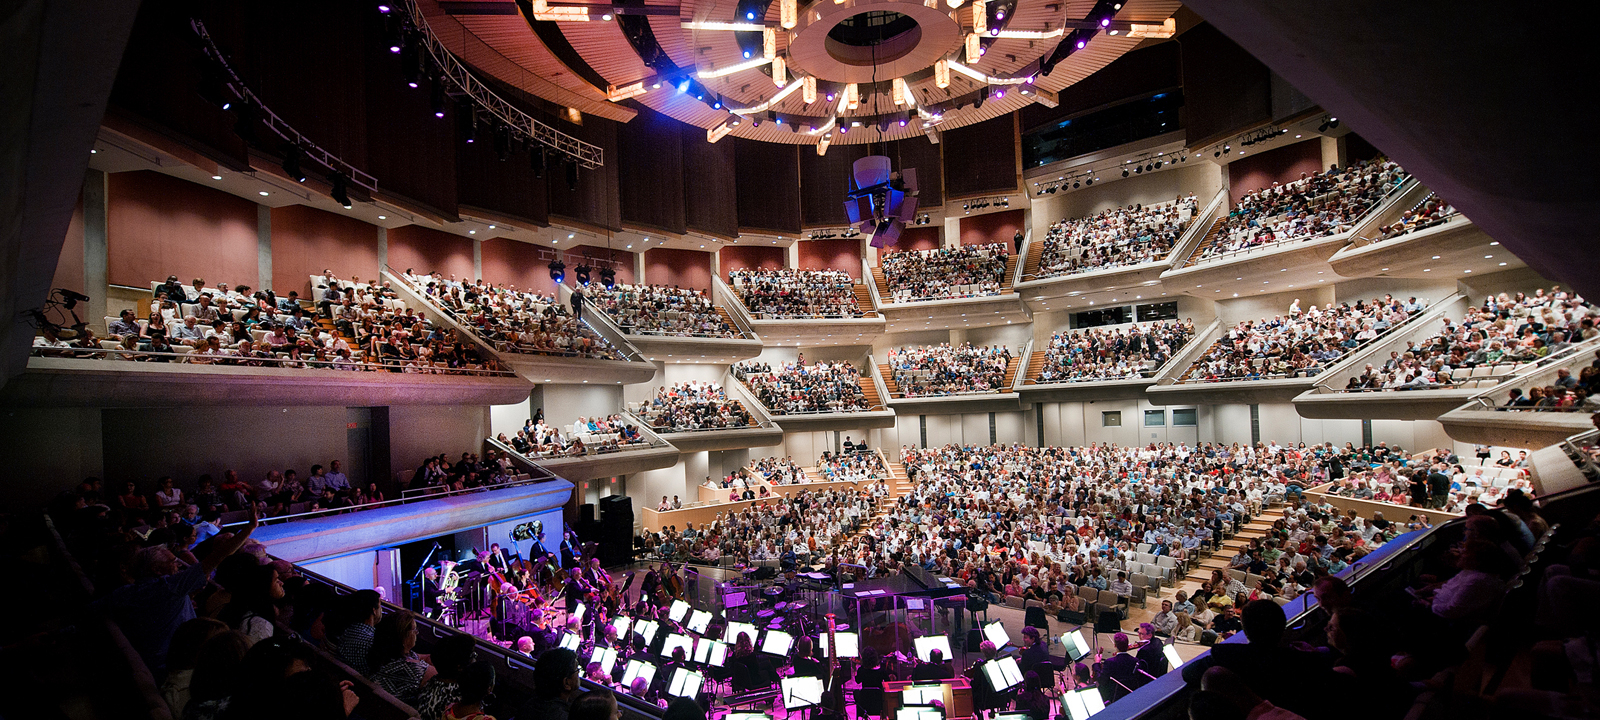 An interior shot of Roy Thomson Hall during a concert